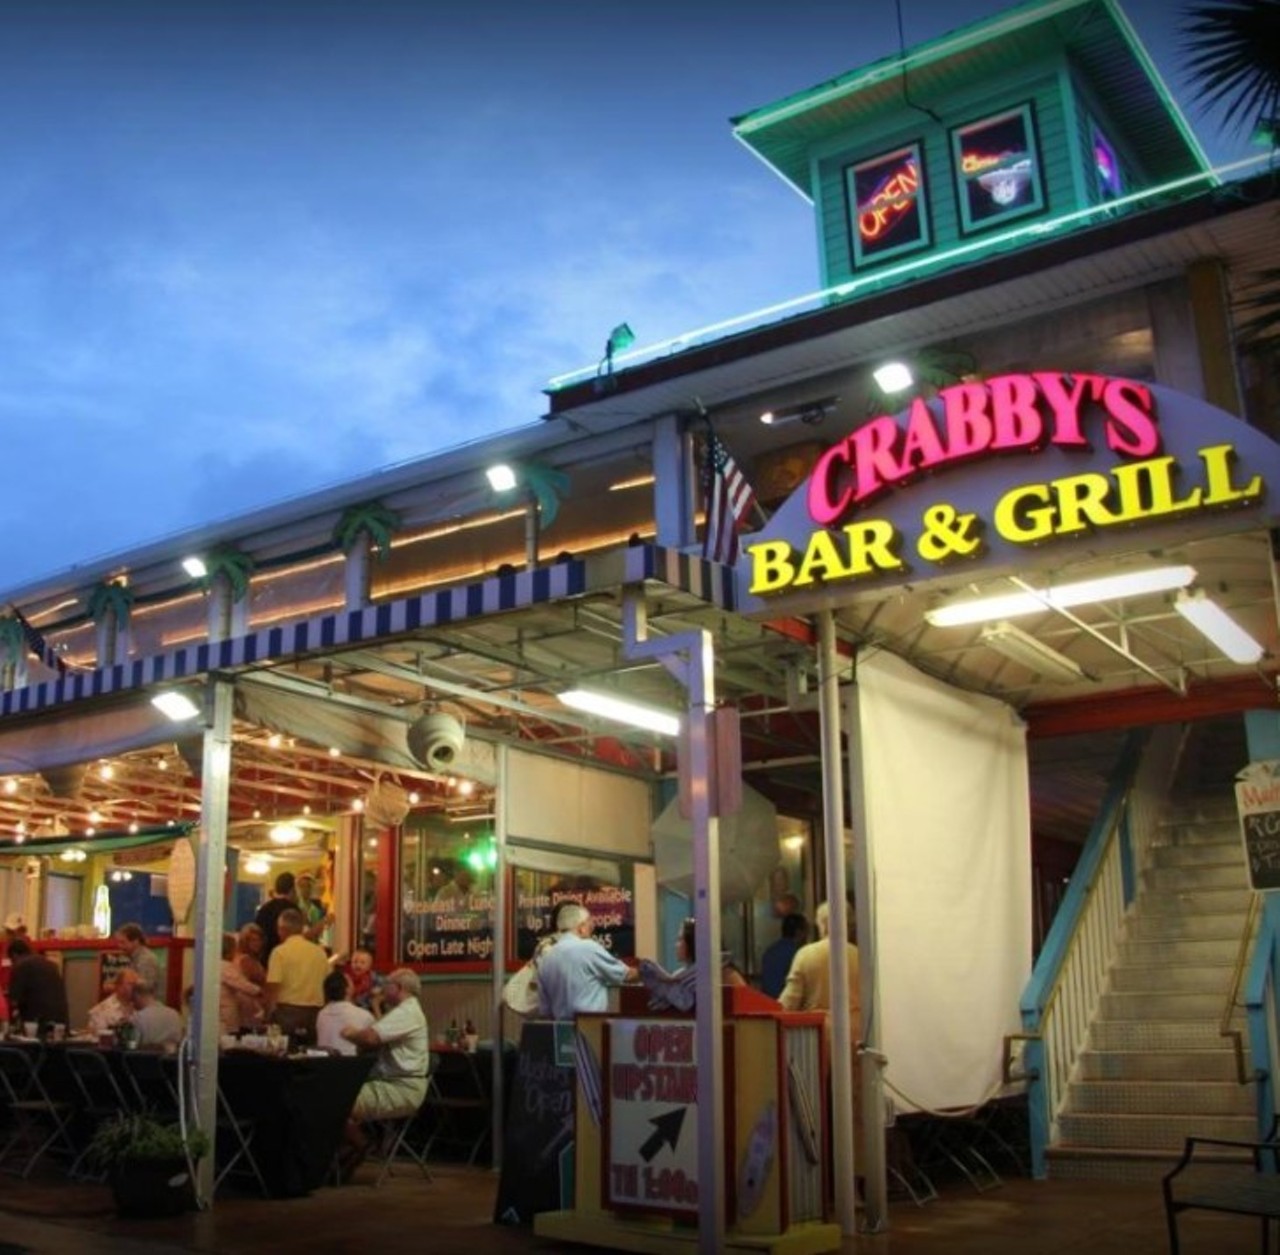 Crabby&#146;s Bar and Grill
333 S Gulfview Blvd., Clearwater, 33763
Although it hasn&#146;t been around long, Crabby&#146;s sure knows how to fit right into the beach lifestyle, what with the eight-hour happy hours and all. In case the name didn&#146;t clue you in, you might want to get some crab, be it the snow crab or crab cakes, while you&#146;re there.
Photo via crabbysbargrill/Instagram